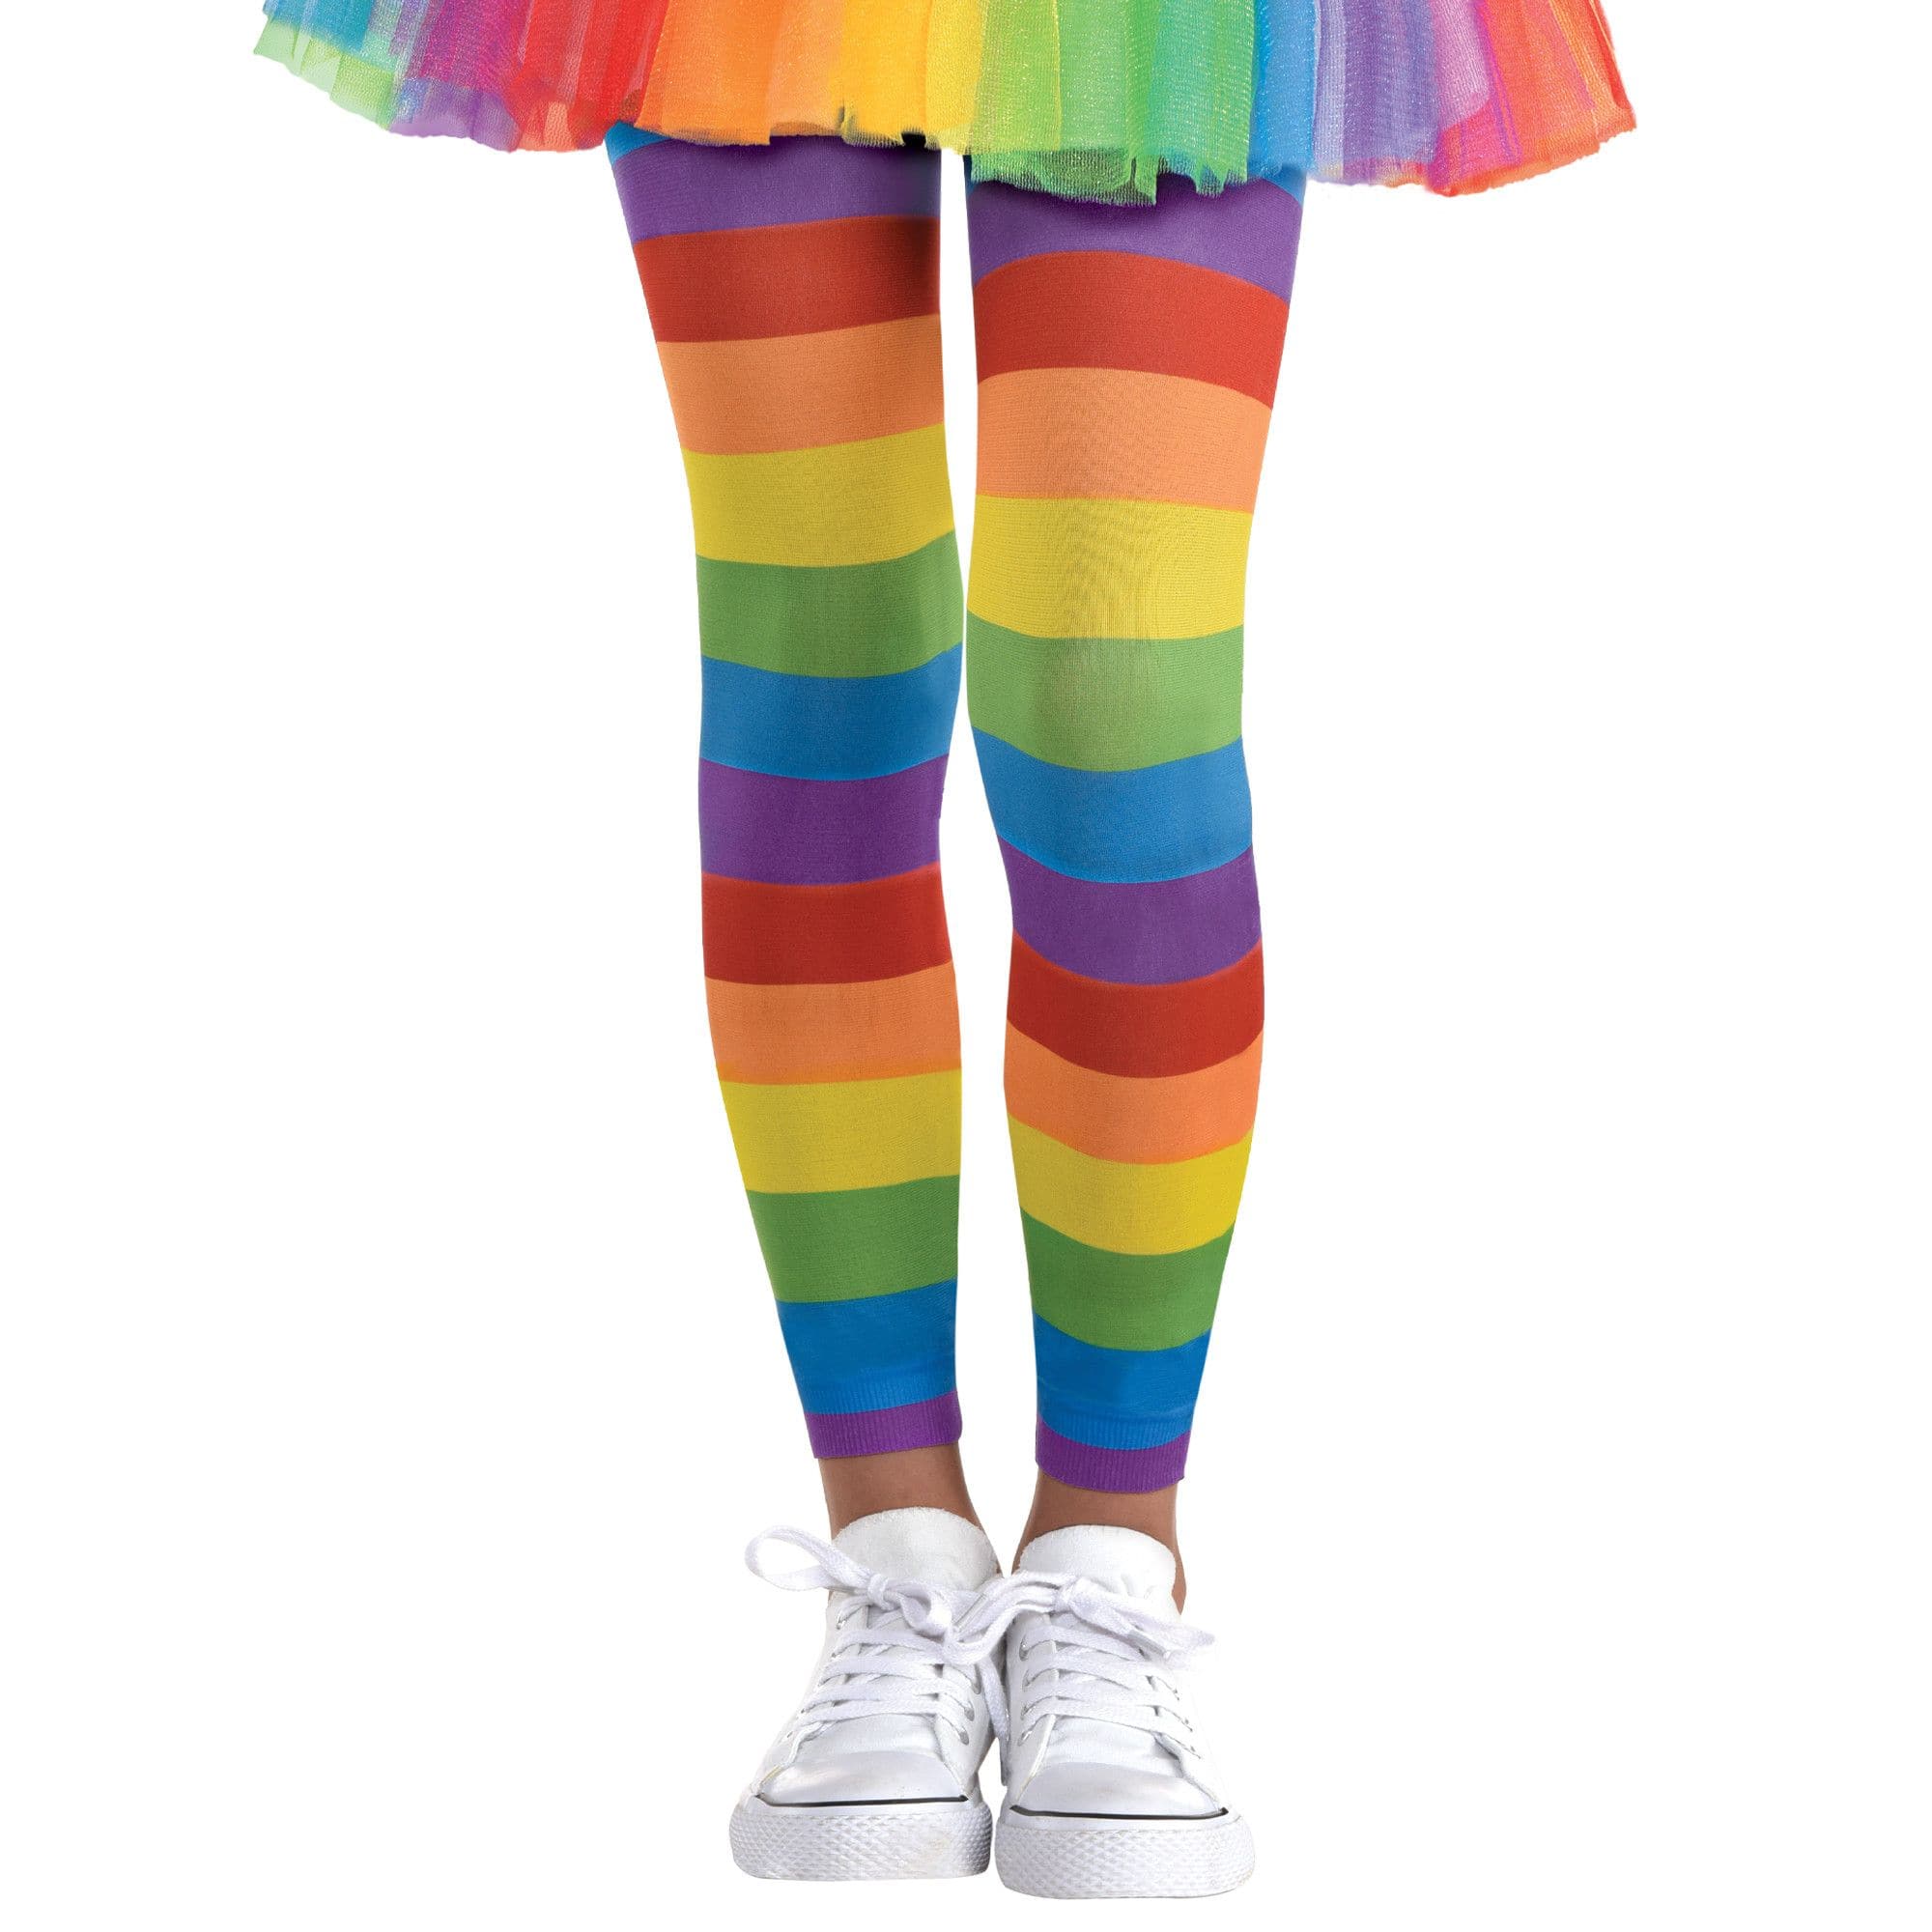 Kids' Footless Tights, Rainbow, One Size, Wearable Accessory for